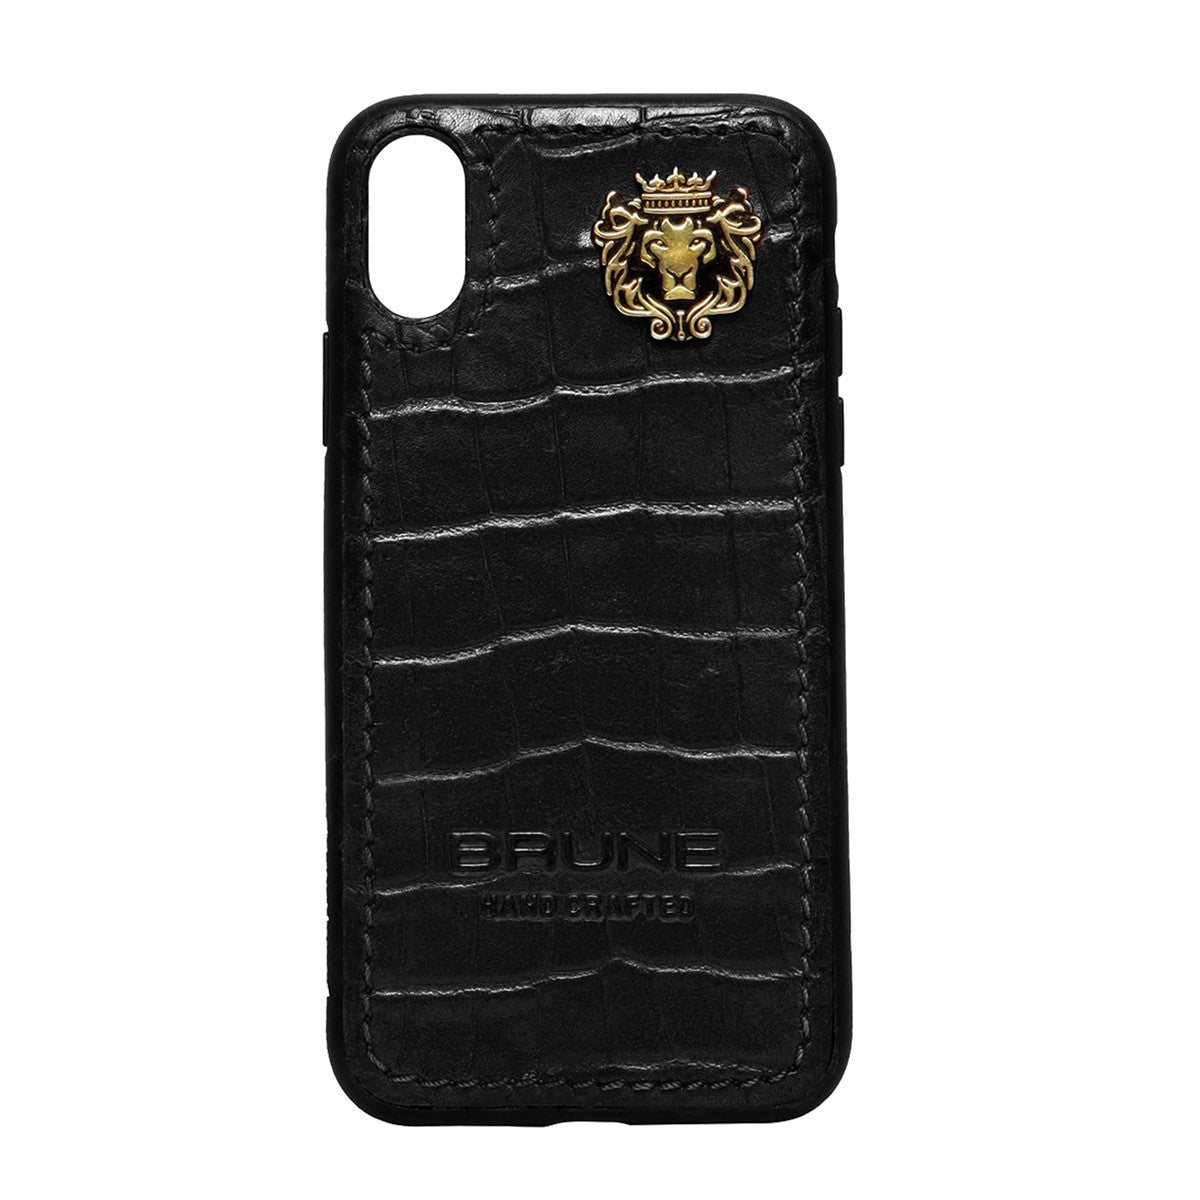 Black Croco Textured Leather Stitched Corner Mobile Cover by Brune & Bareskin